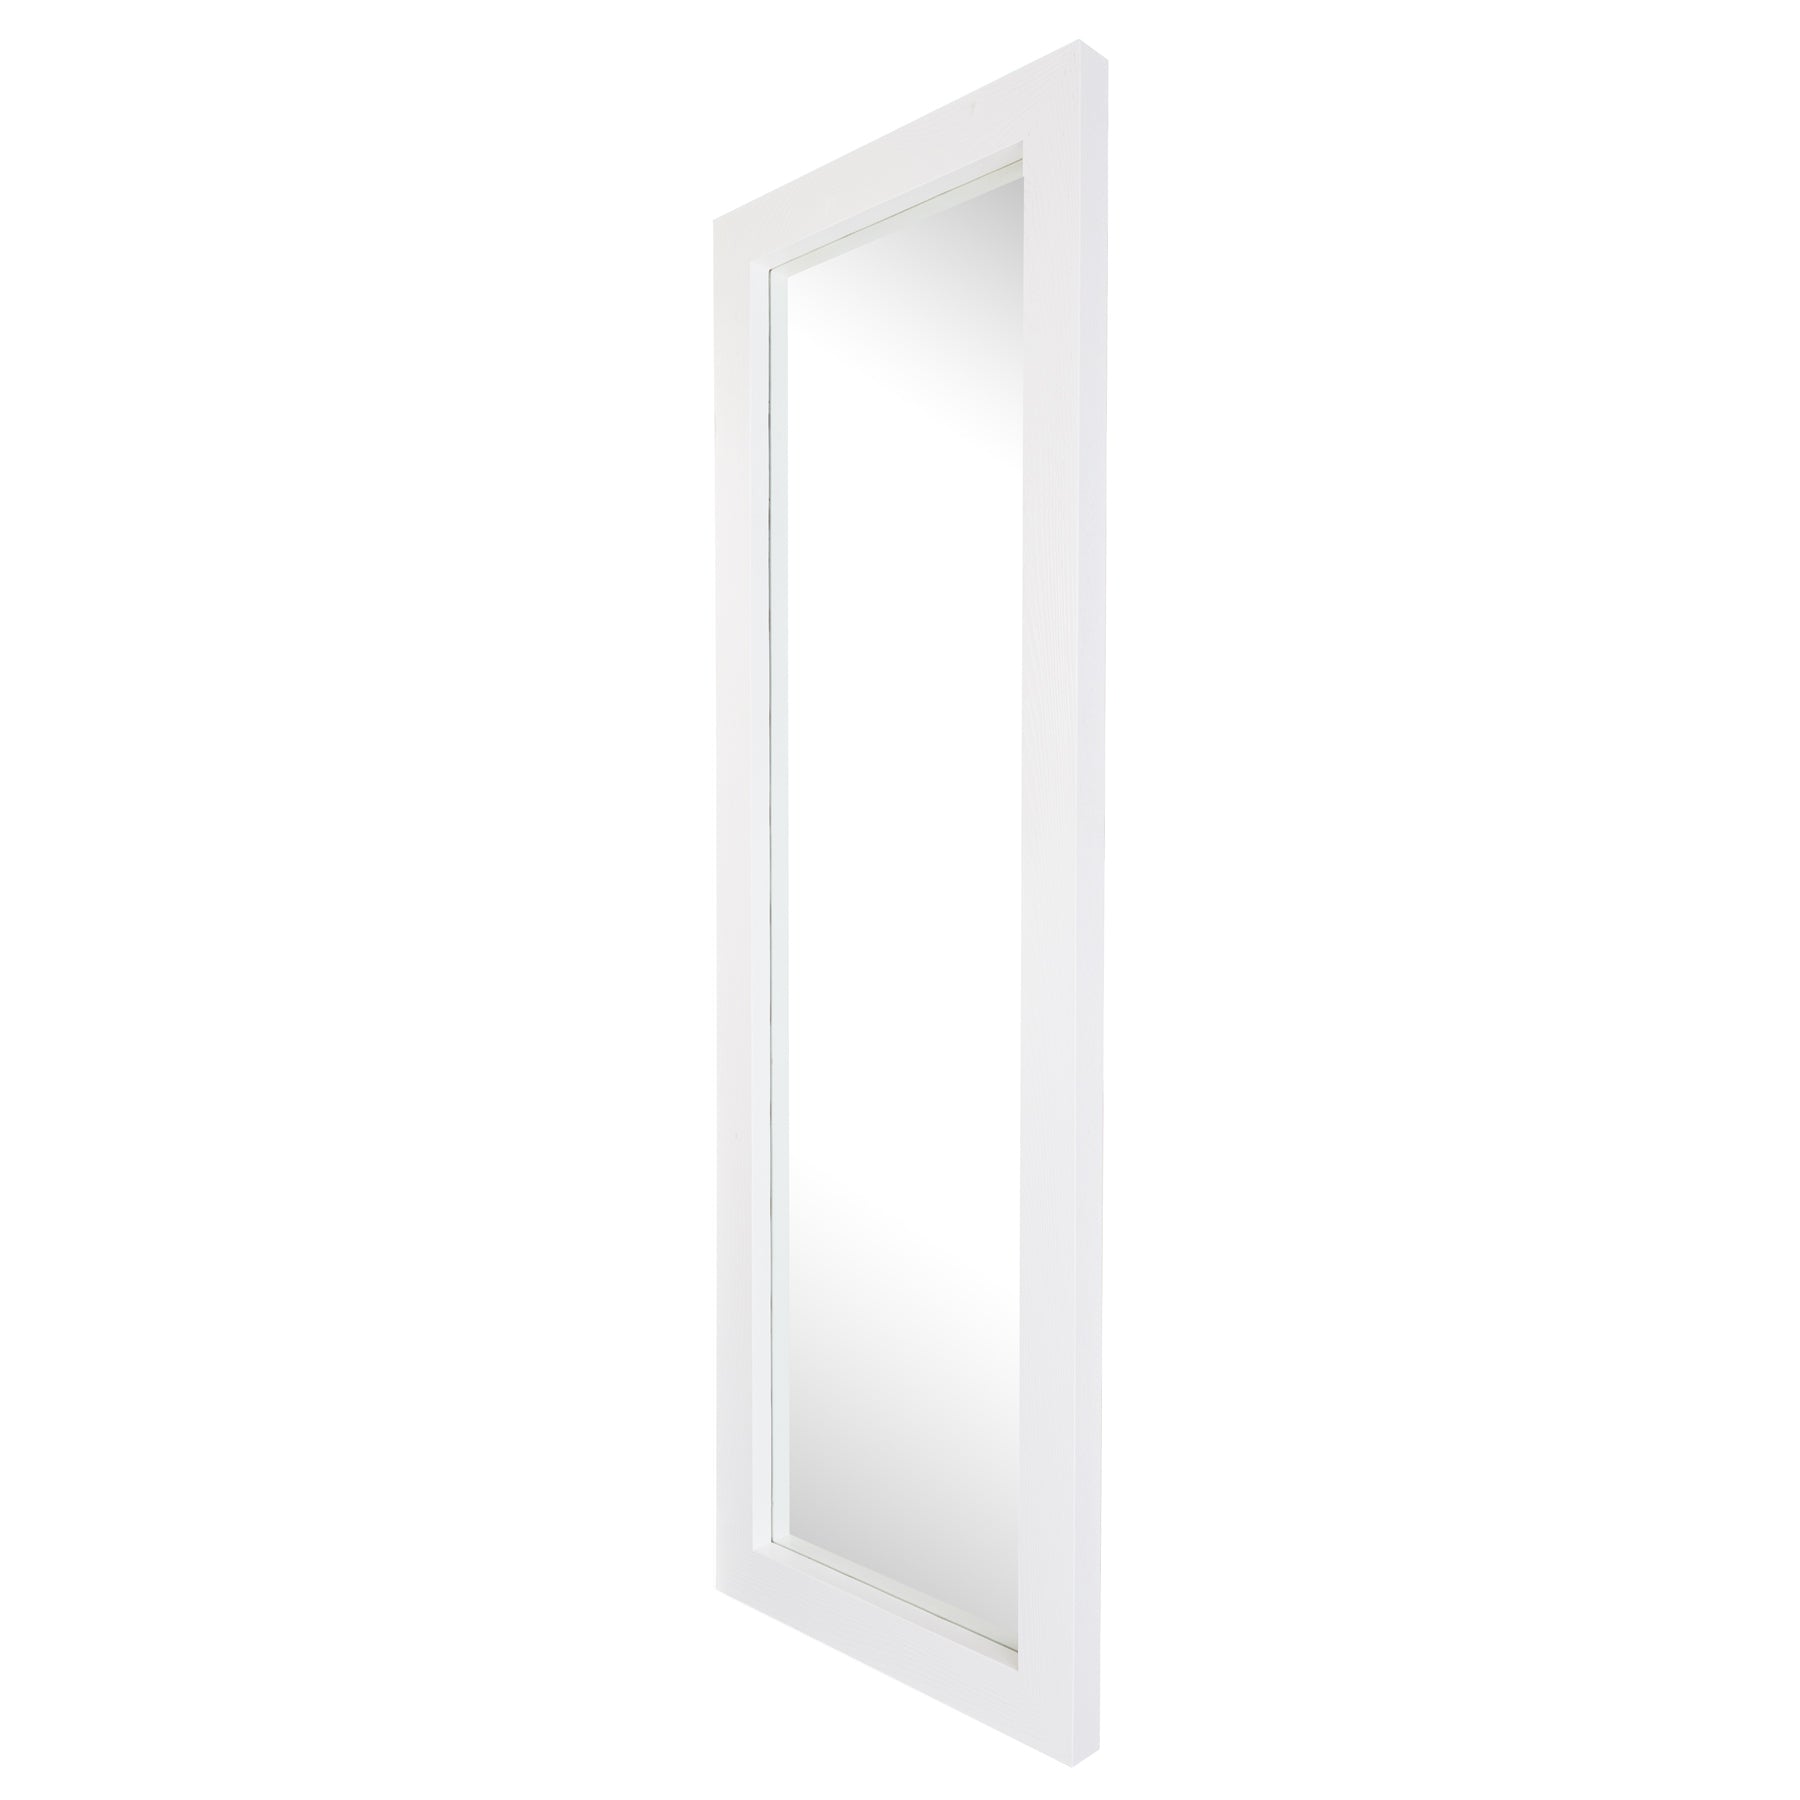 Artic Super Dress Mirror -White - Paramount Mirrors and Prints